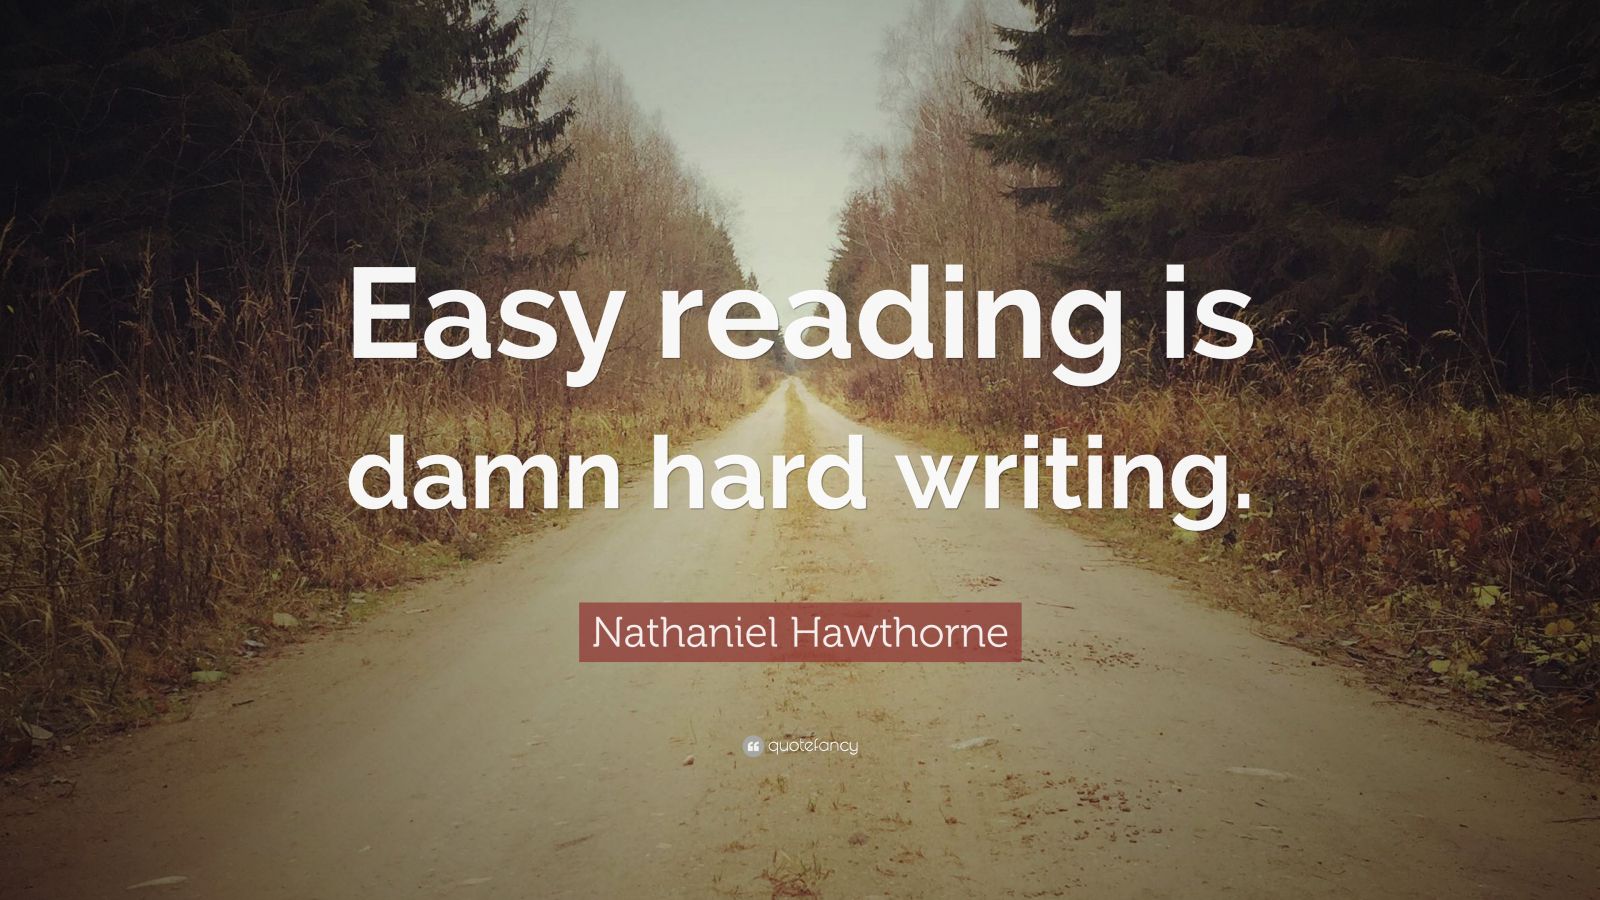 Nathaniel Hawthorne Quote: “Easy reading is damn hard writing.” (12